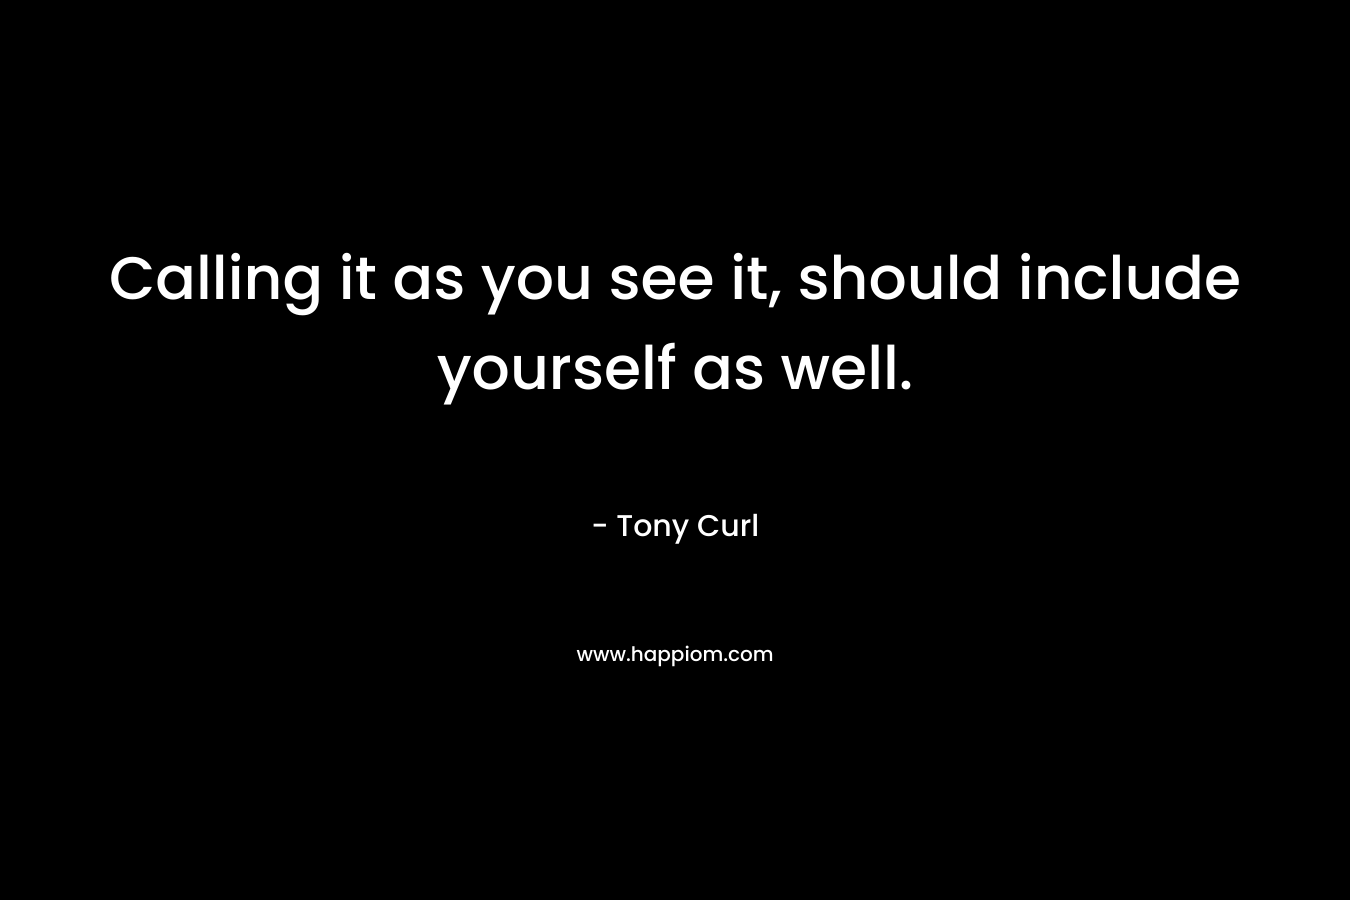 Calling it as you see it, should include yourself as well. – Tony Curl